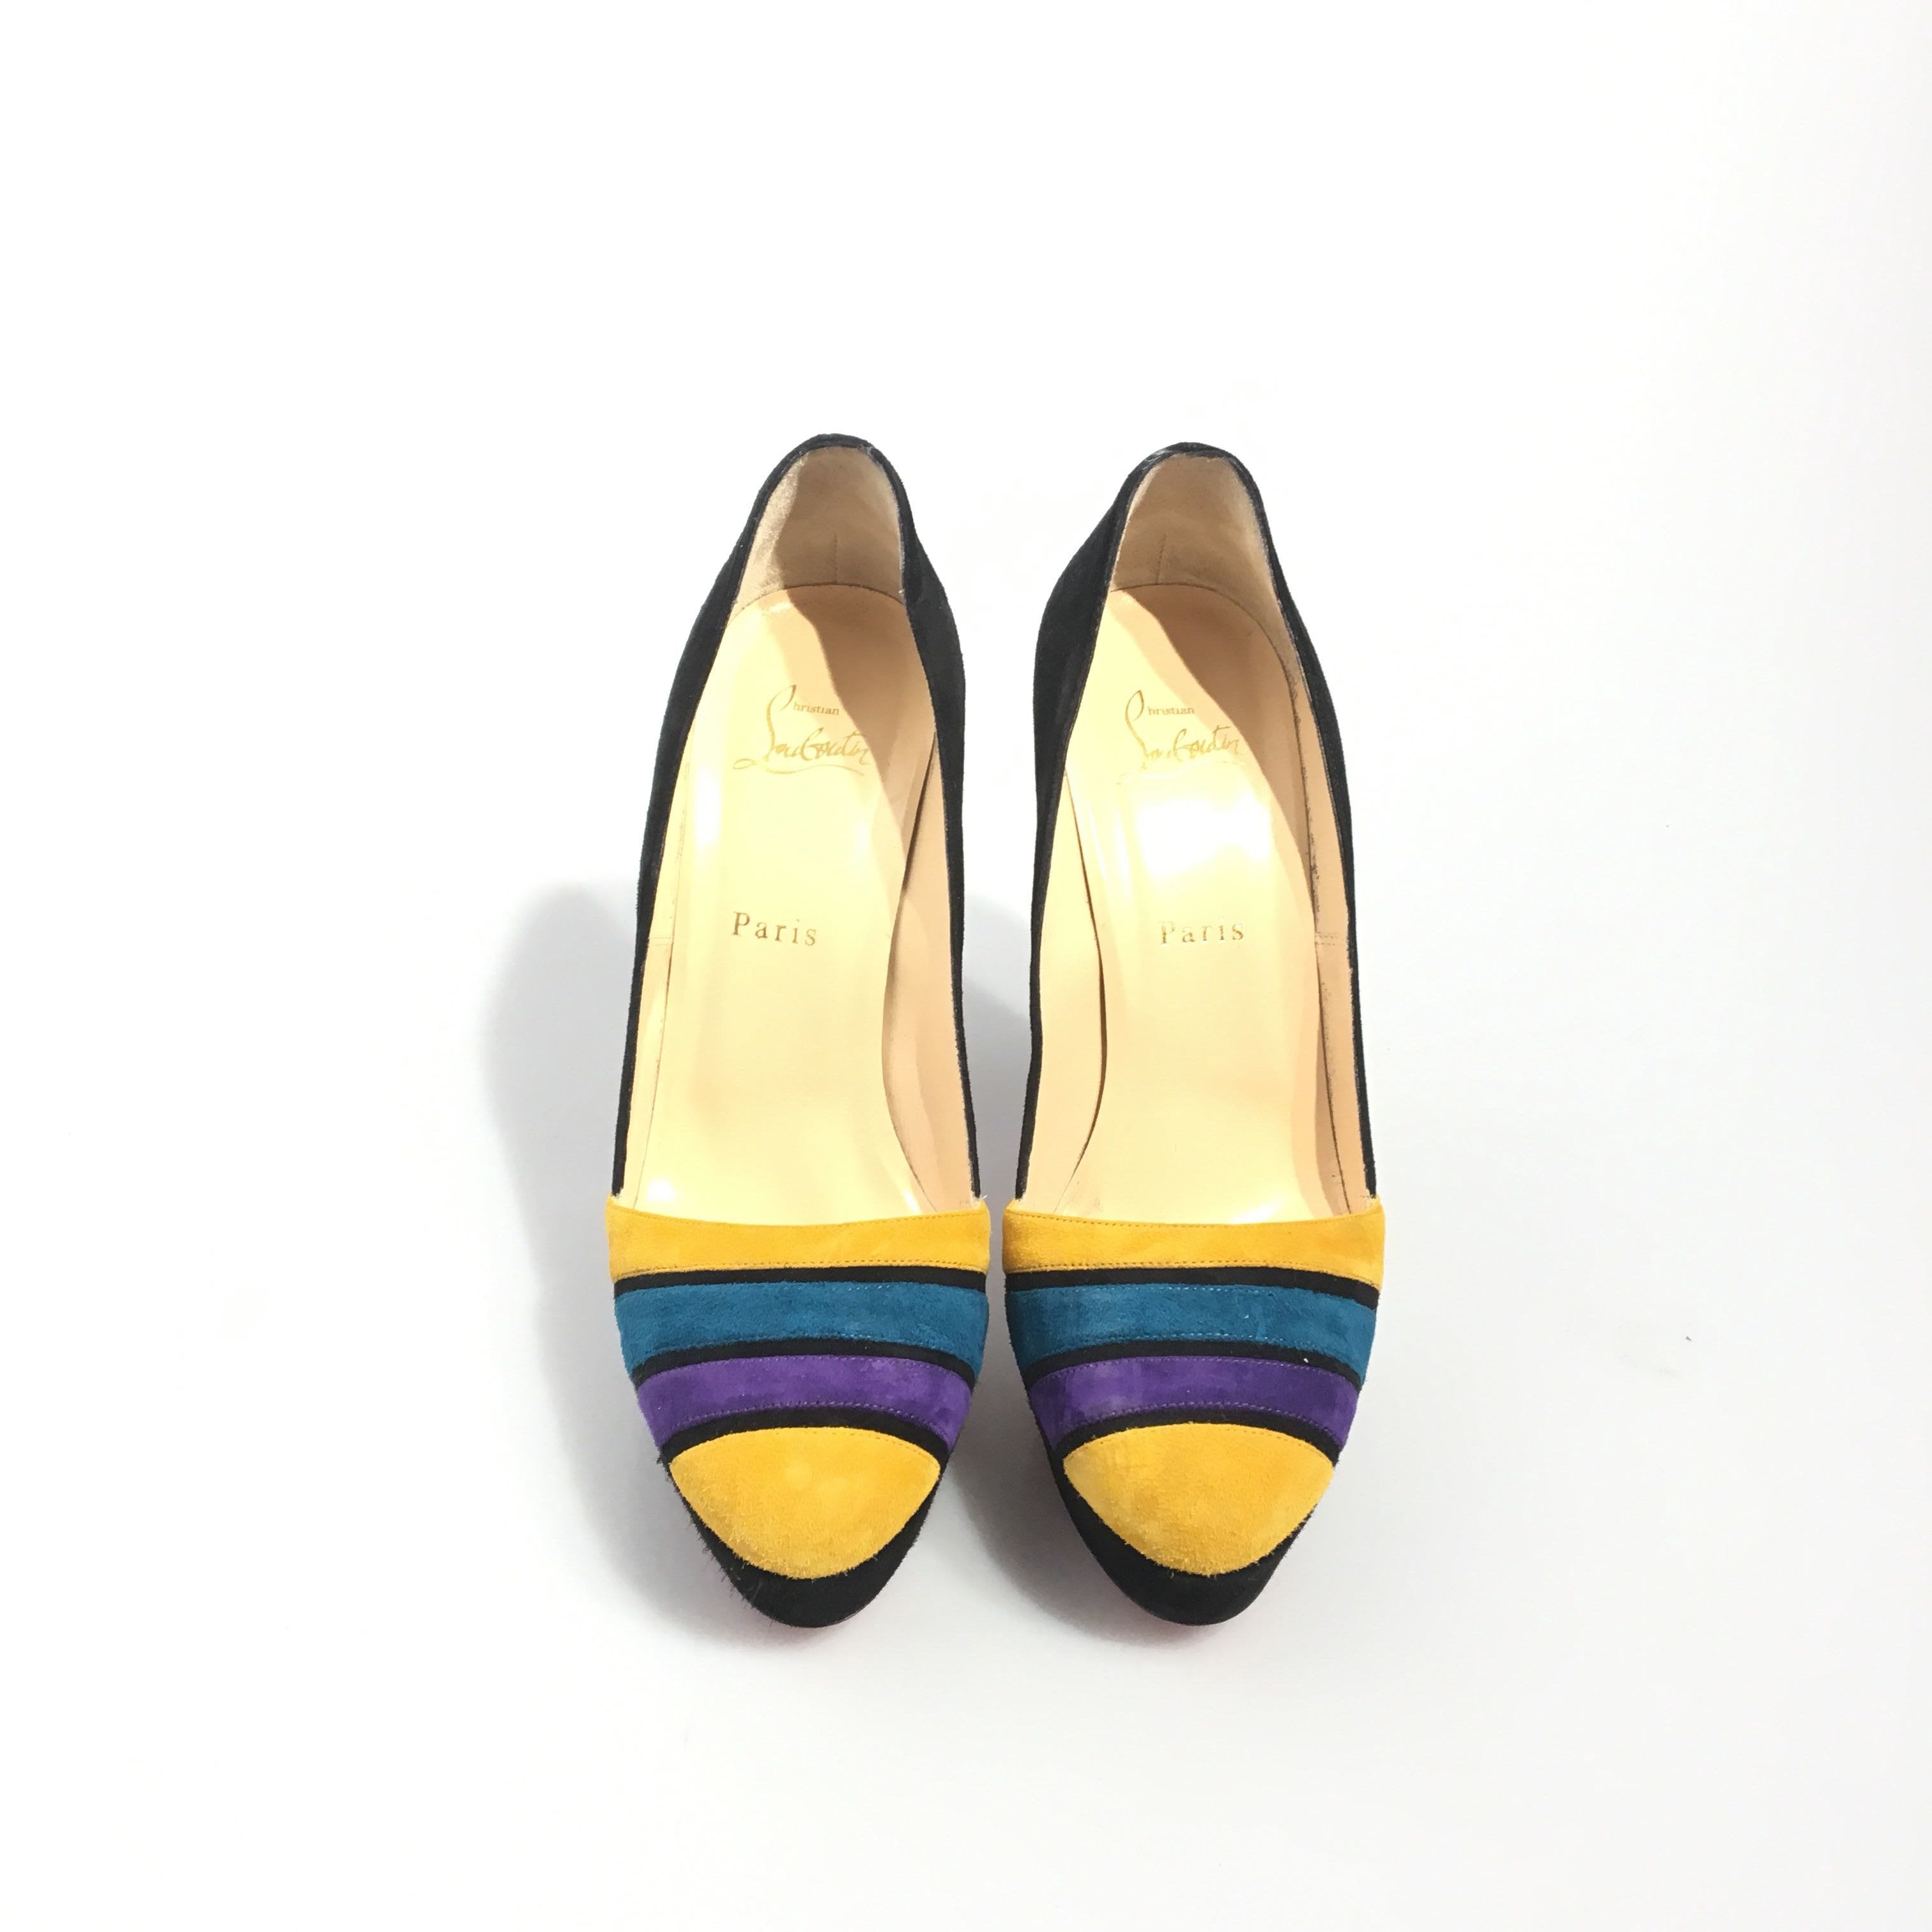 Buy & Consign Authentic Christian Louboutin Multi Colour Suede Pumps 39.5 at The Plush Posh